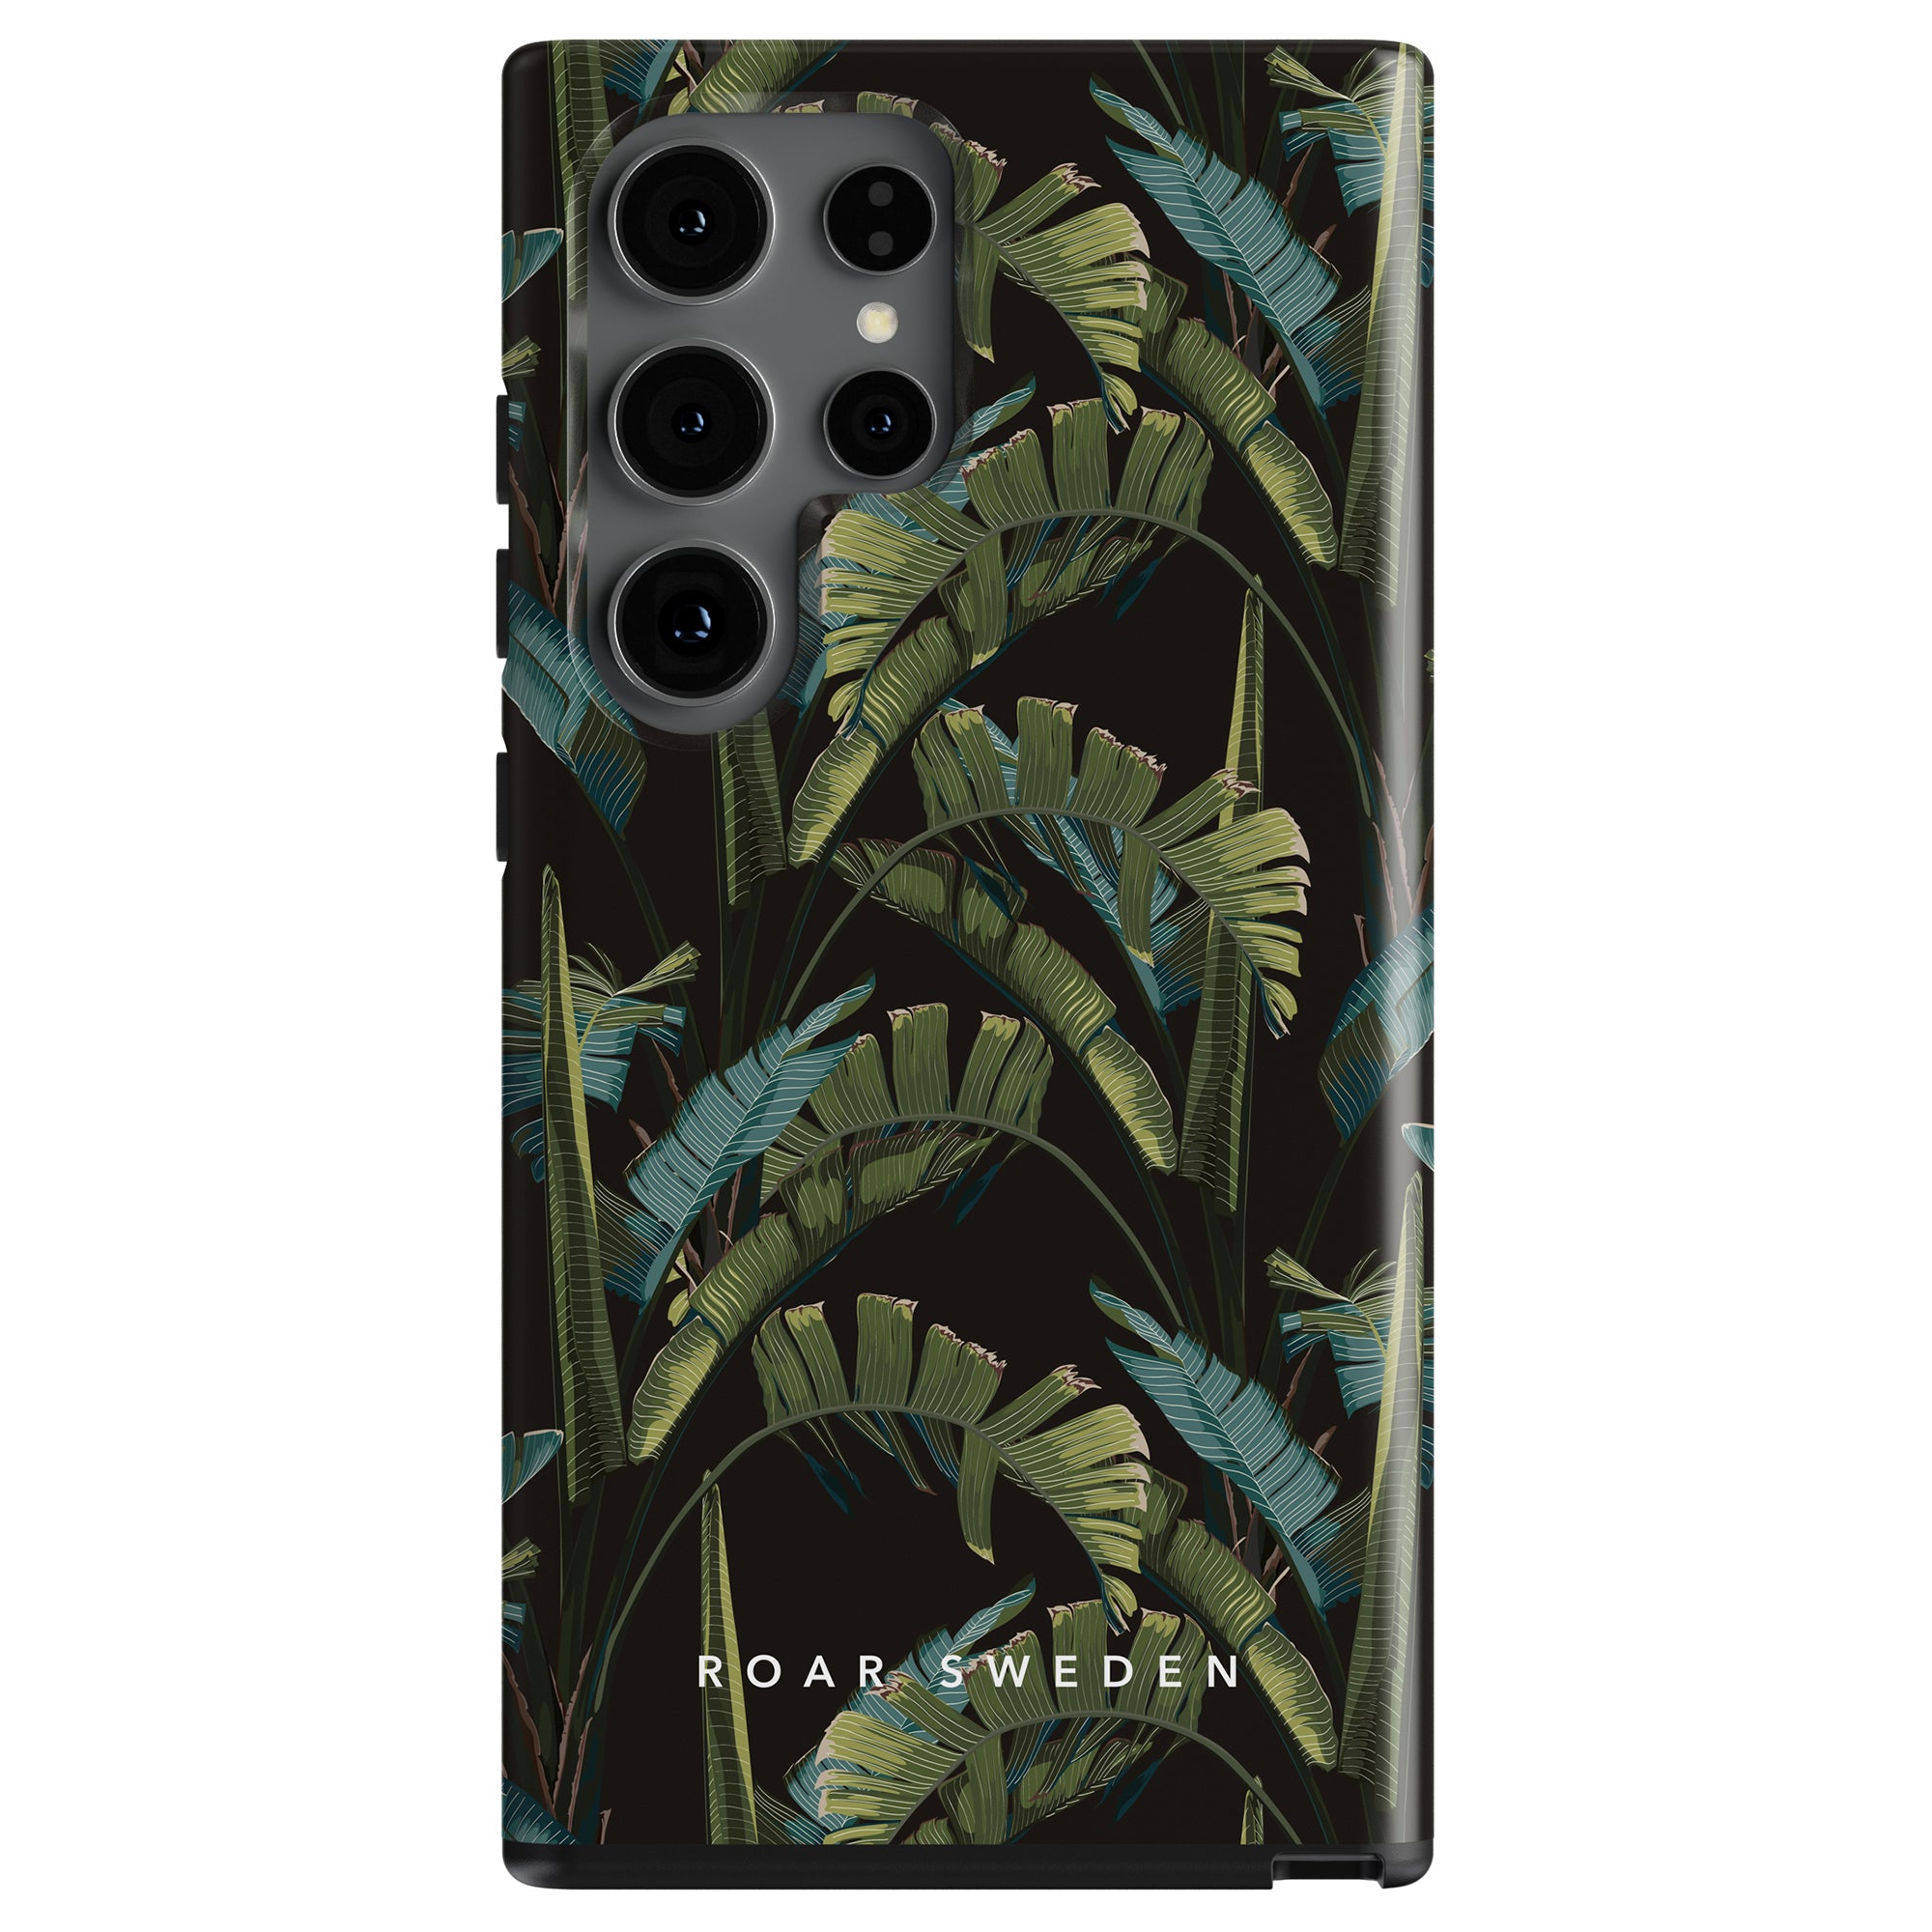 A smartphone with a Mystic Jungle - Tough Case and multiple camera lenses.